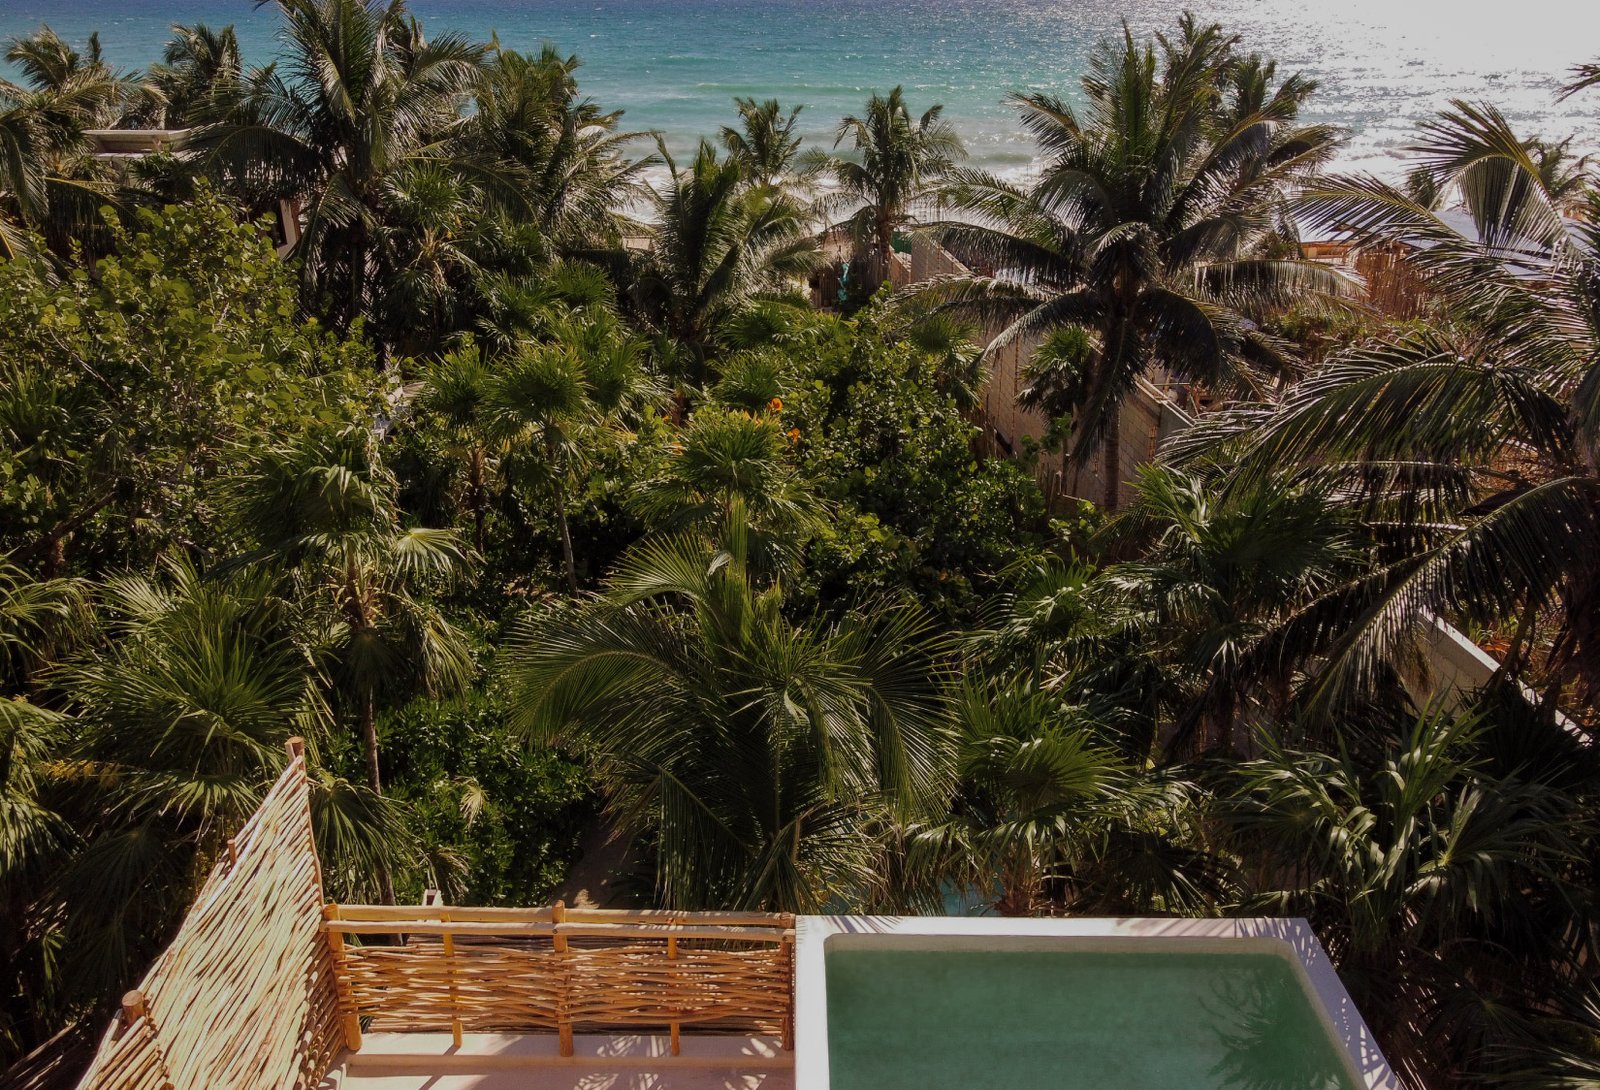 Incredible aerial ocean view from the terrace of the villa Chechén Suite in Tulum, Mexico